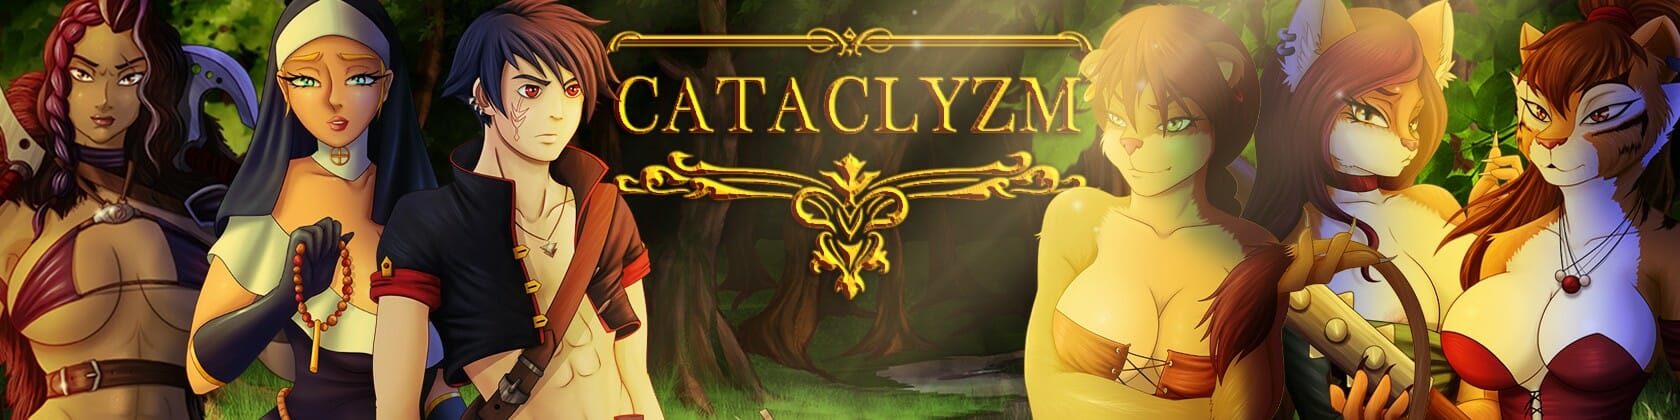 Cataclyzm Adult Game Android Apk Download (2)